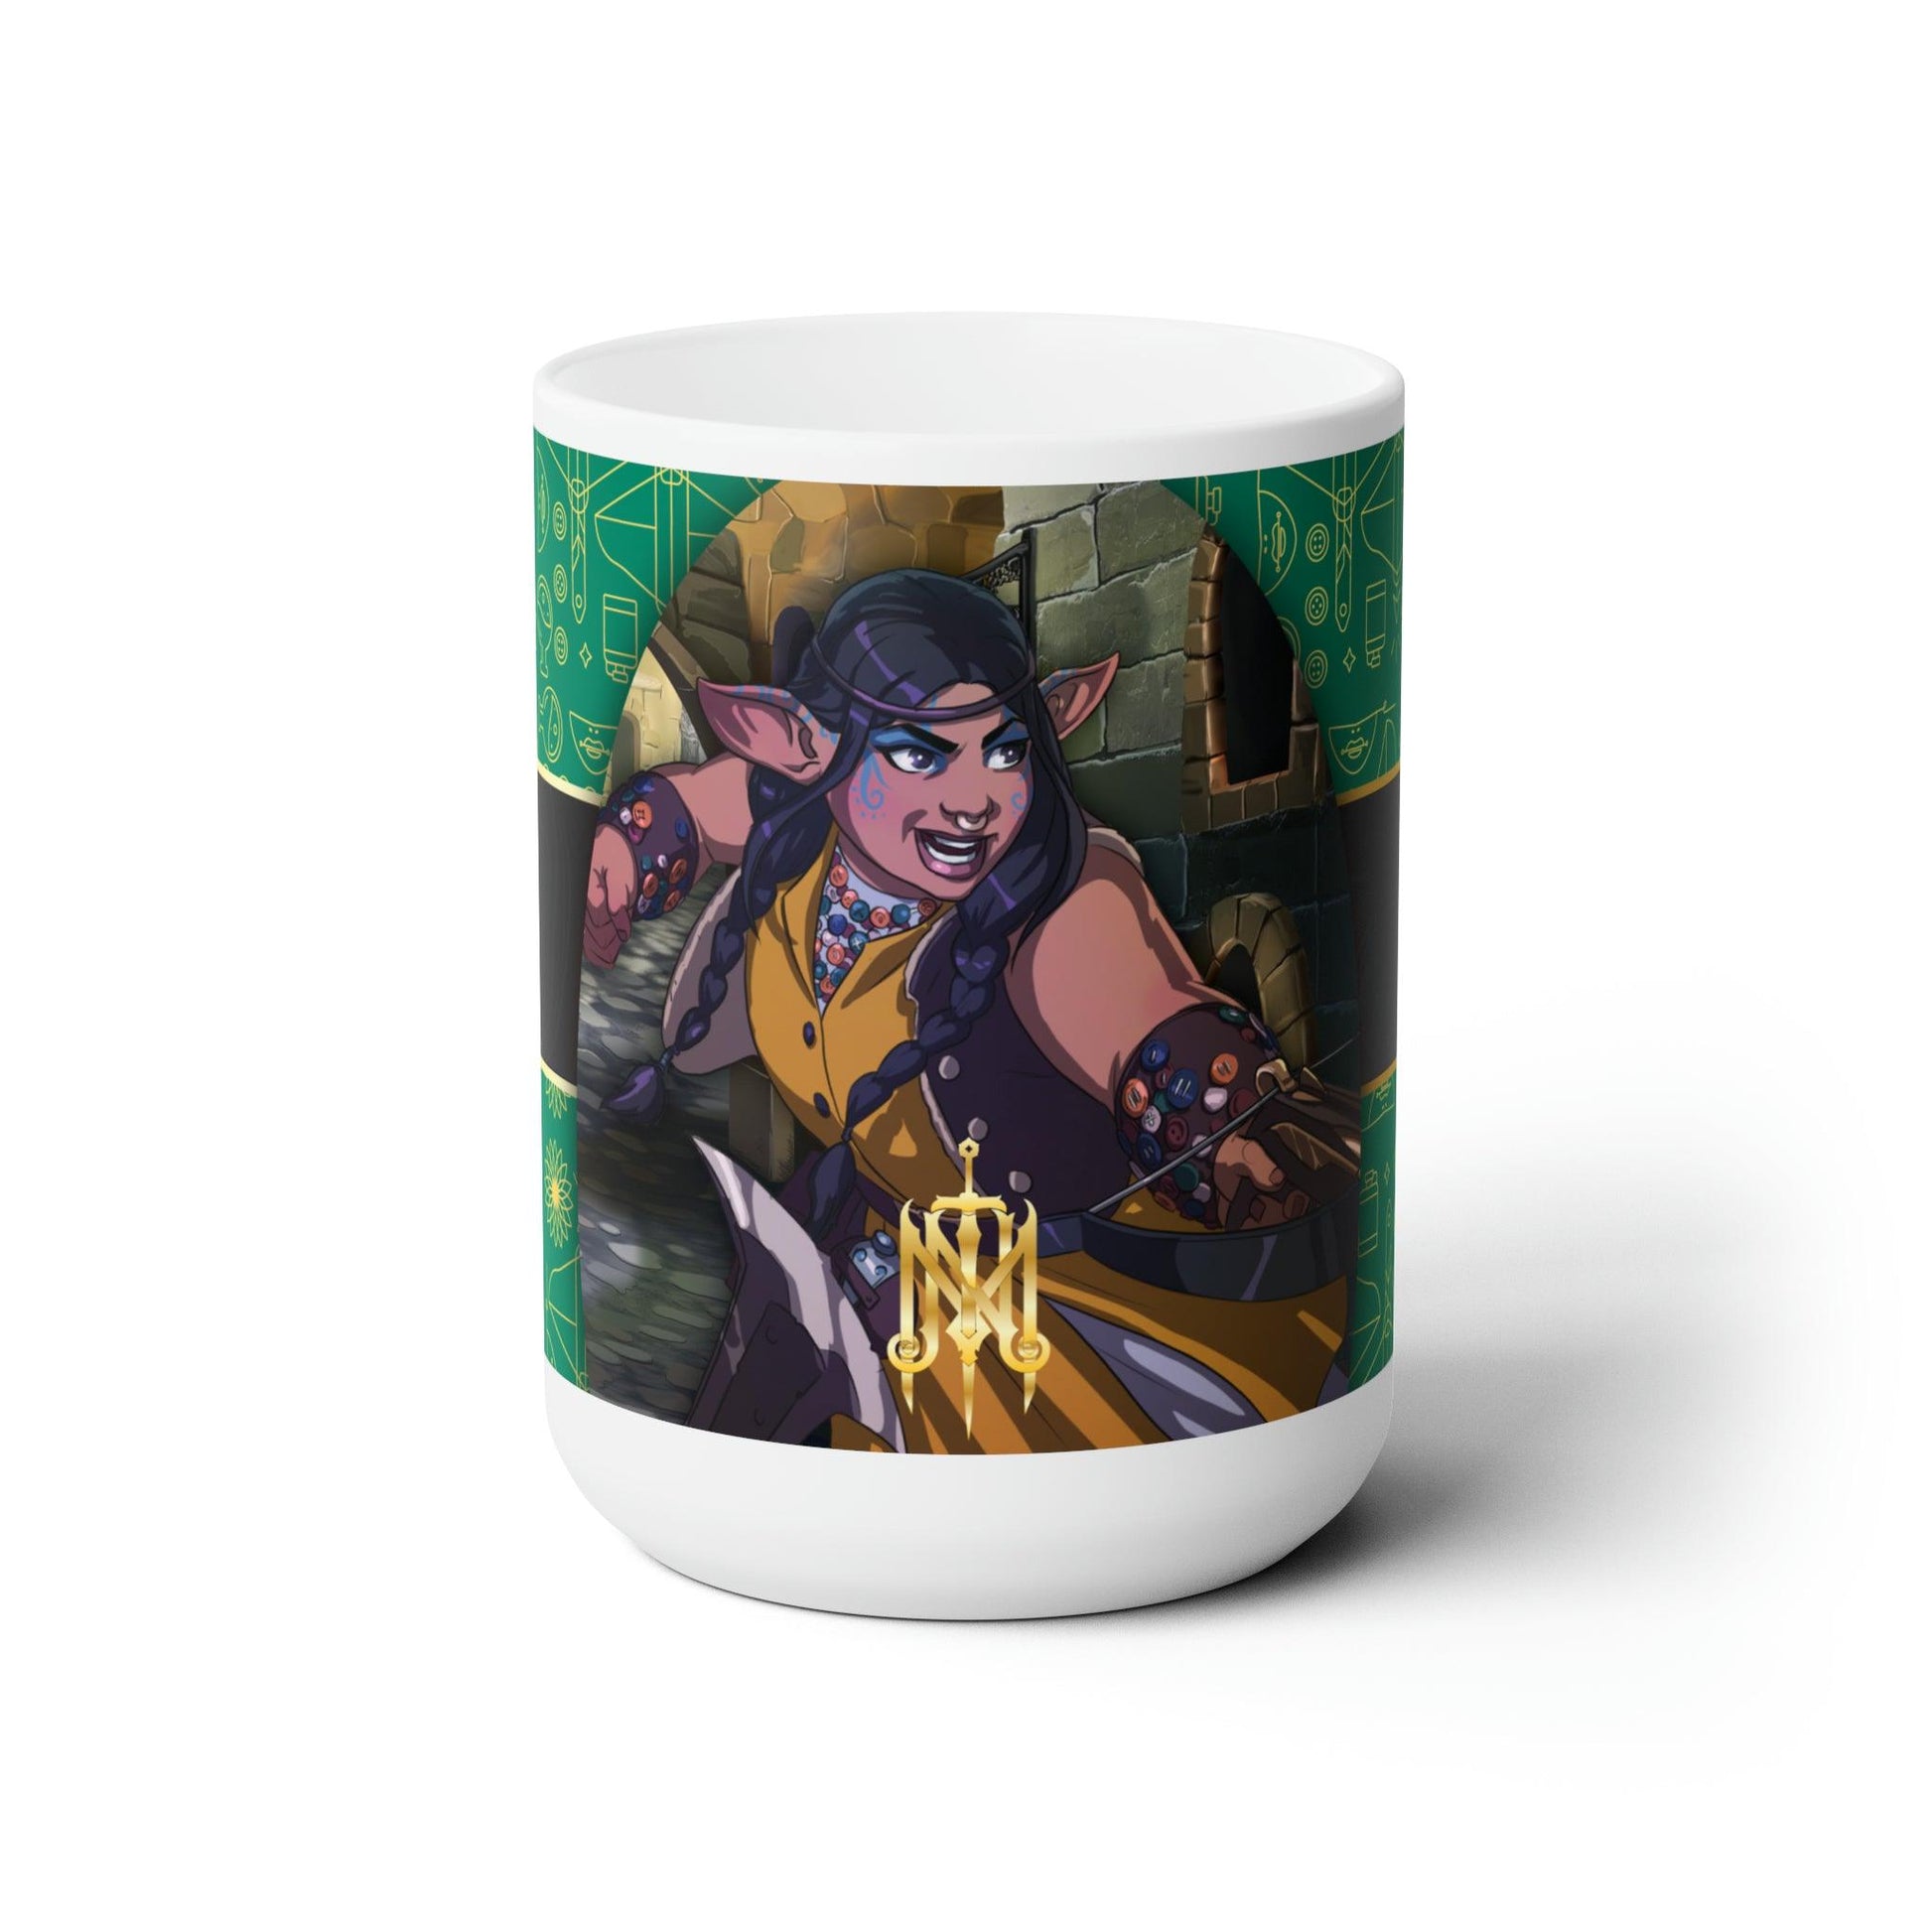 Critical Role - Mighty Nein - Brenatto’s Mystery Potion Mug - Geek Grind Coffee